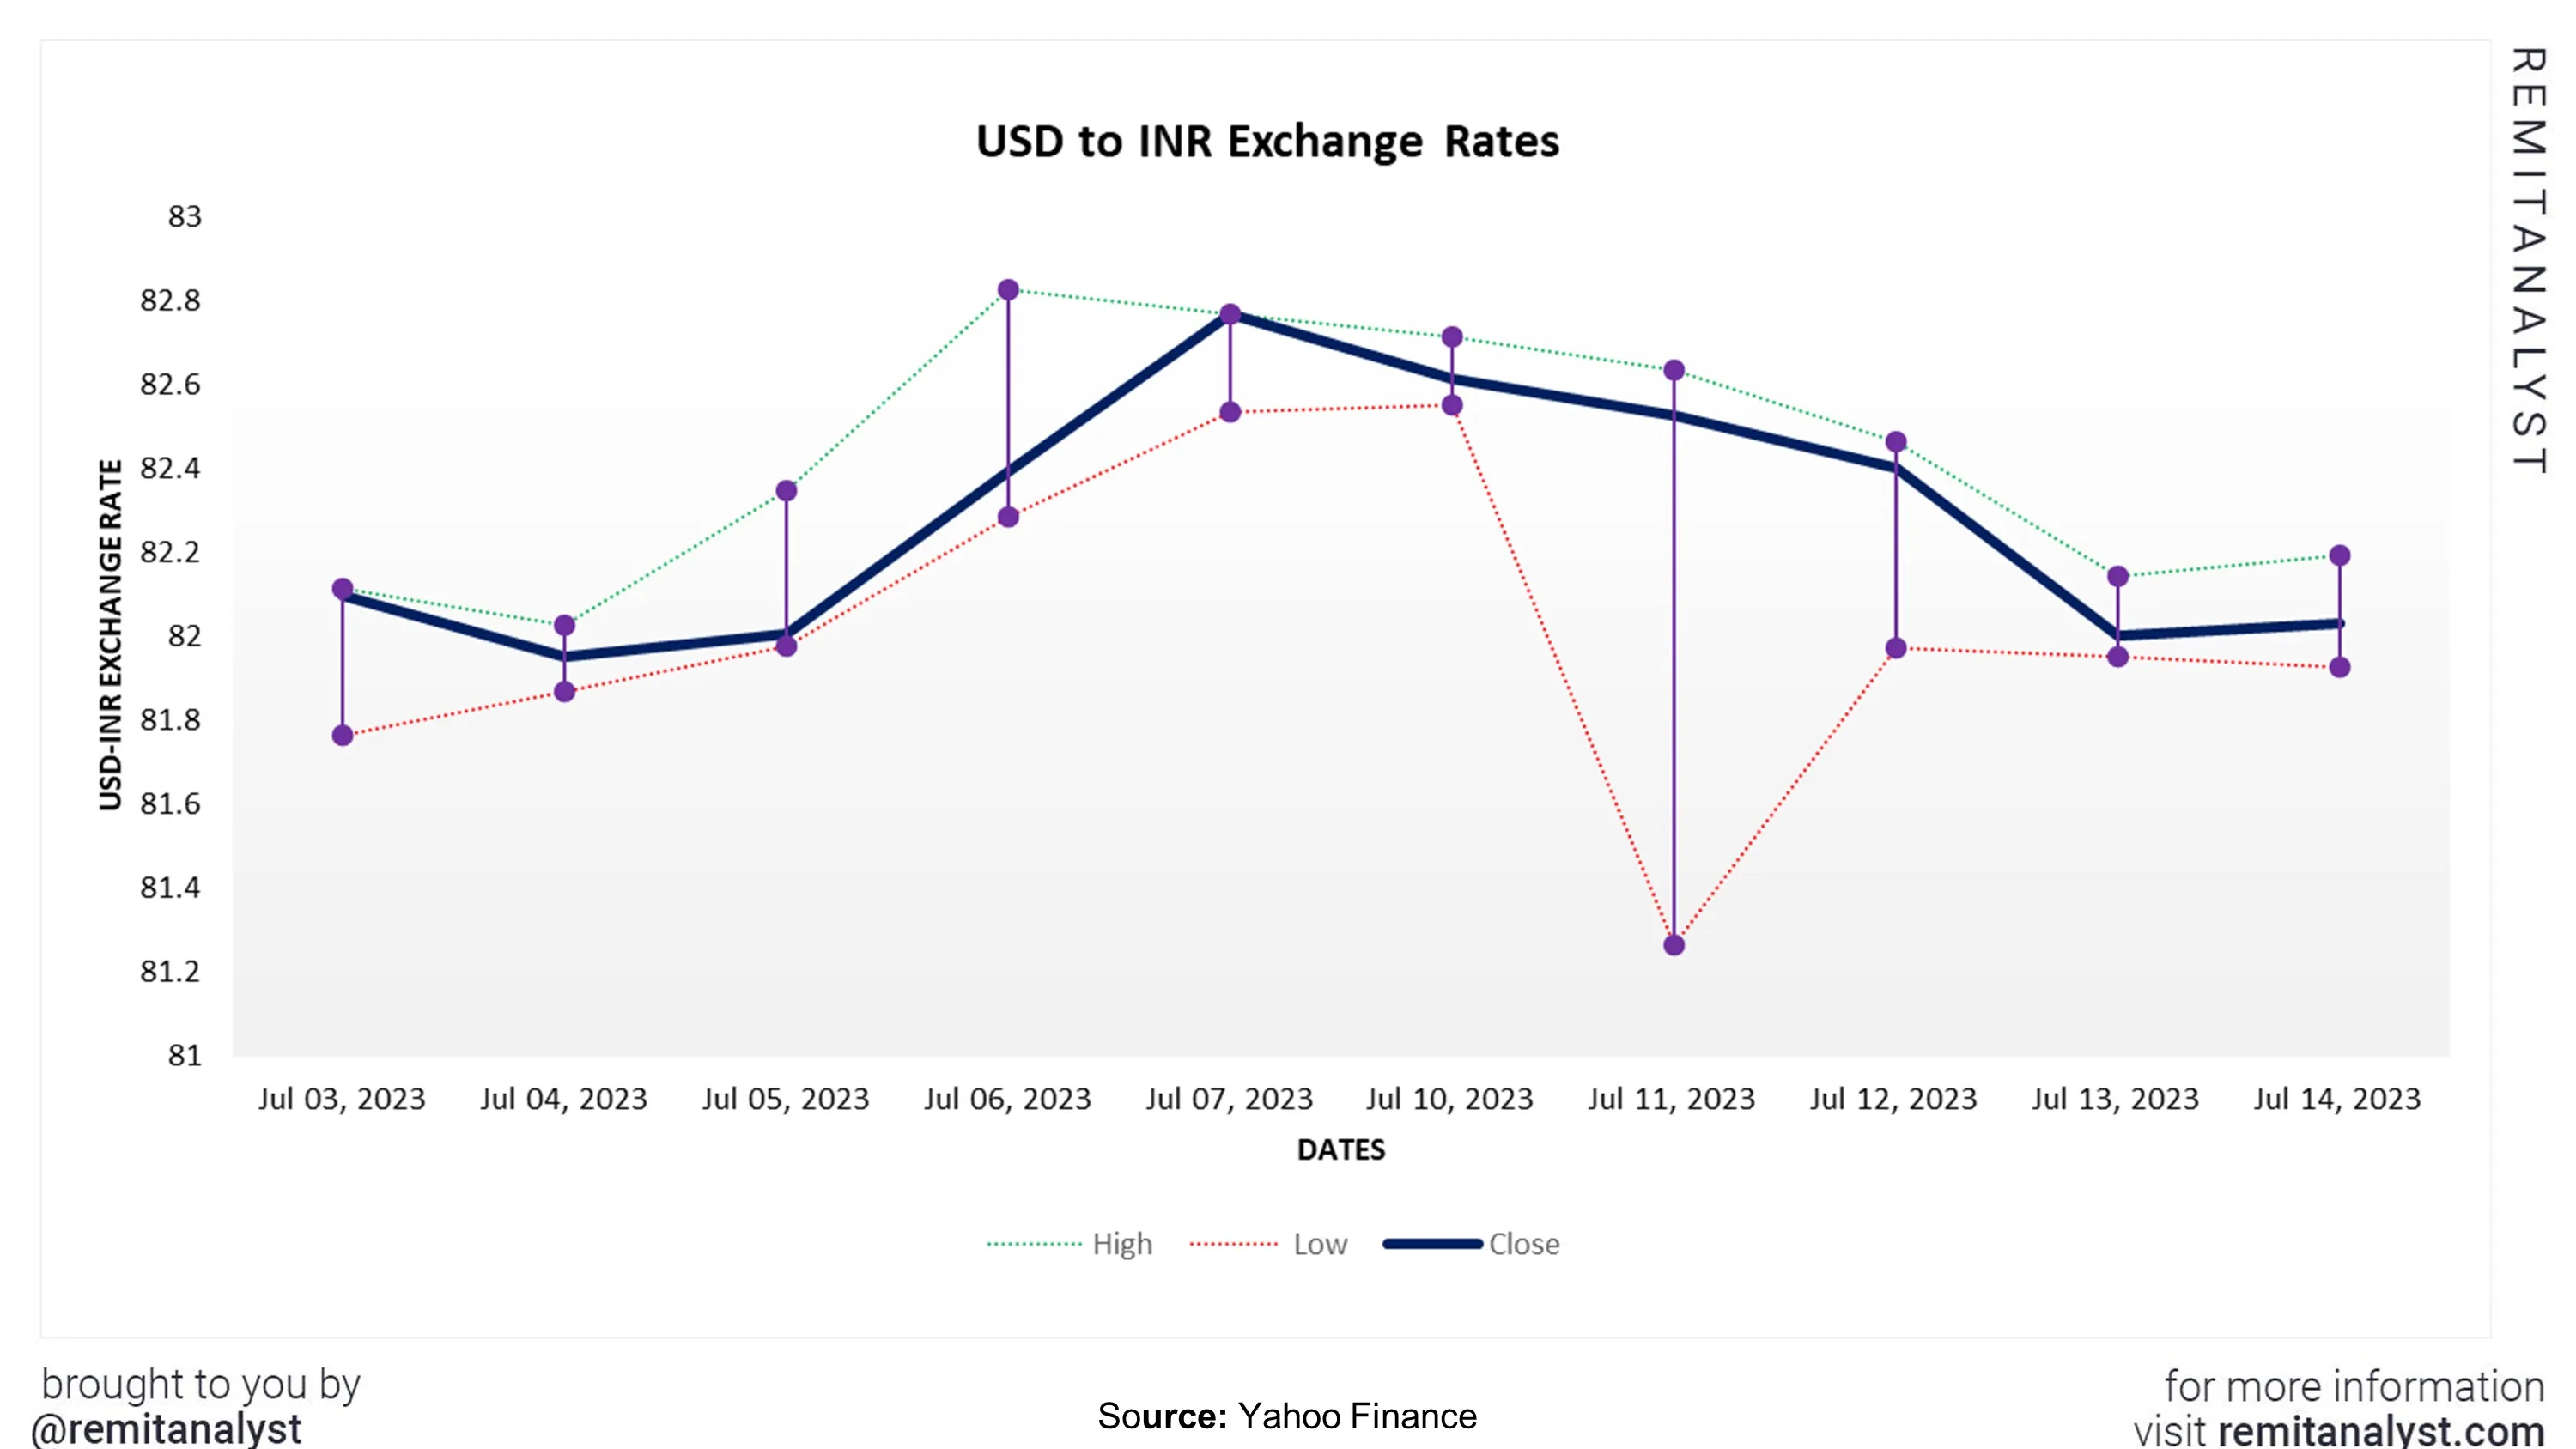 usd-to-inr-exchange-rate-from-3-jul-2023-to-14-jul-2023